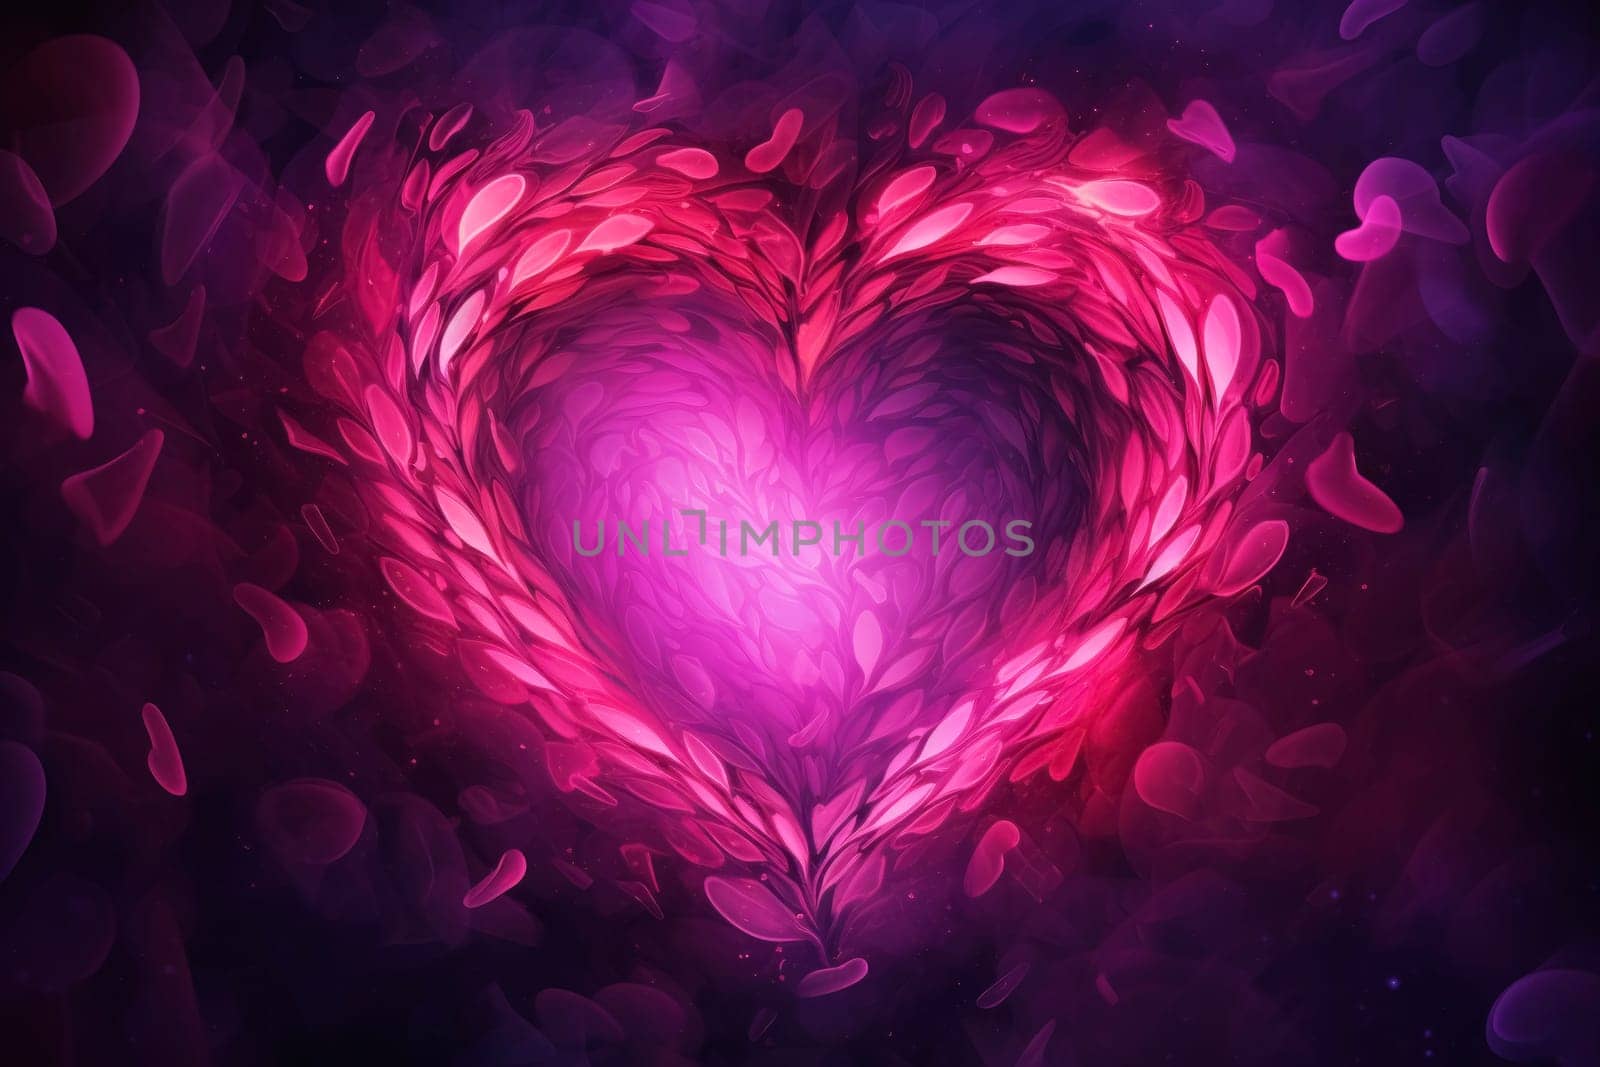 Abstract artwork of a heart-shaped nebula with vibrant pink and purple hues, evoking a sense of cosmic love and romance.